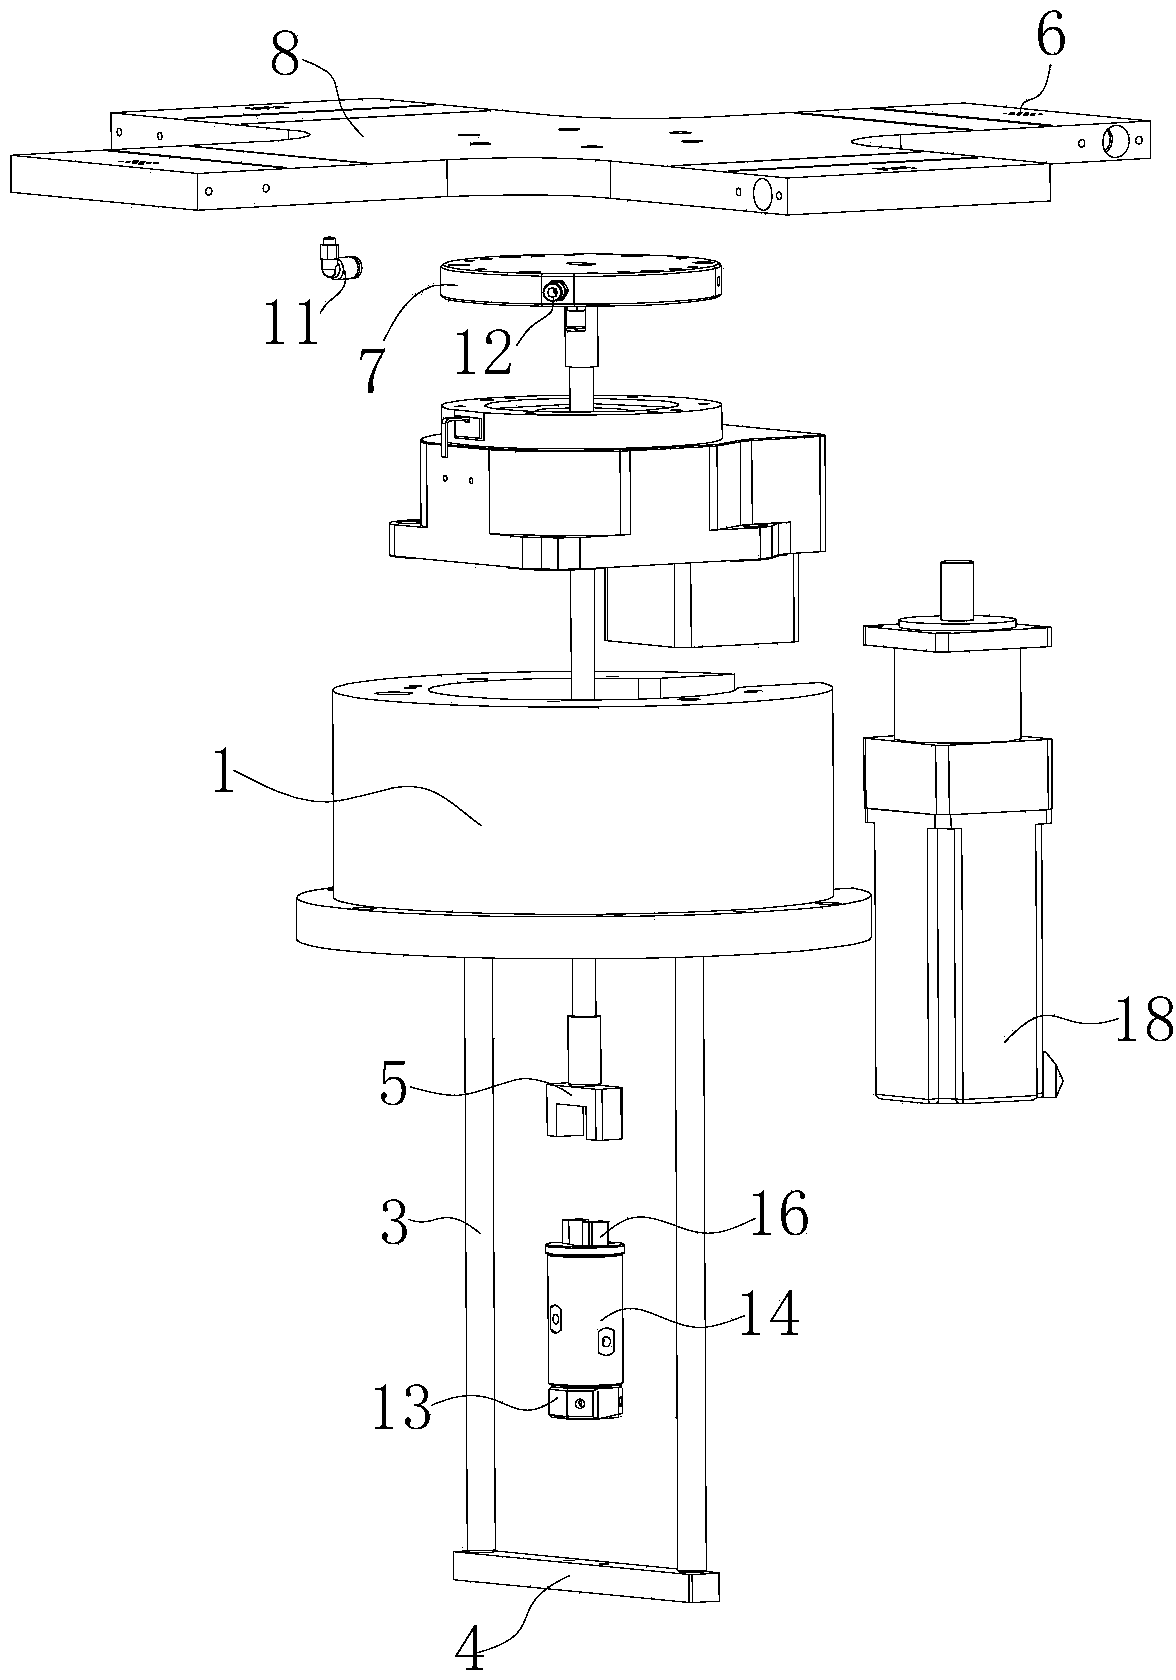 Rotating disc type multi-station automatic dispensing mechanism